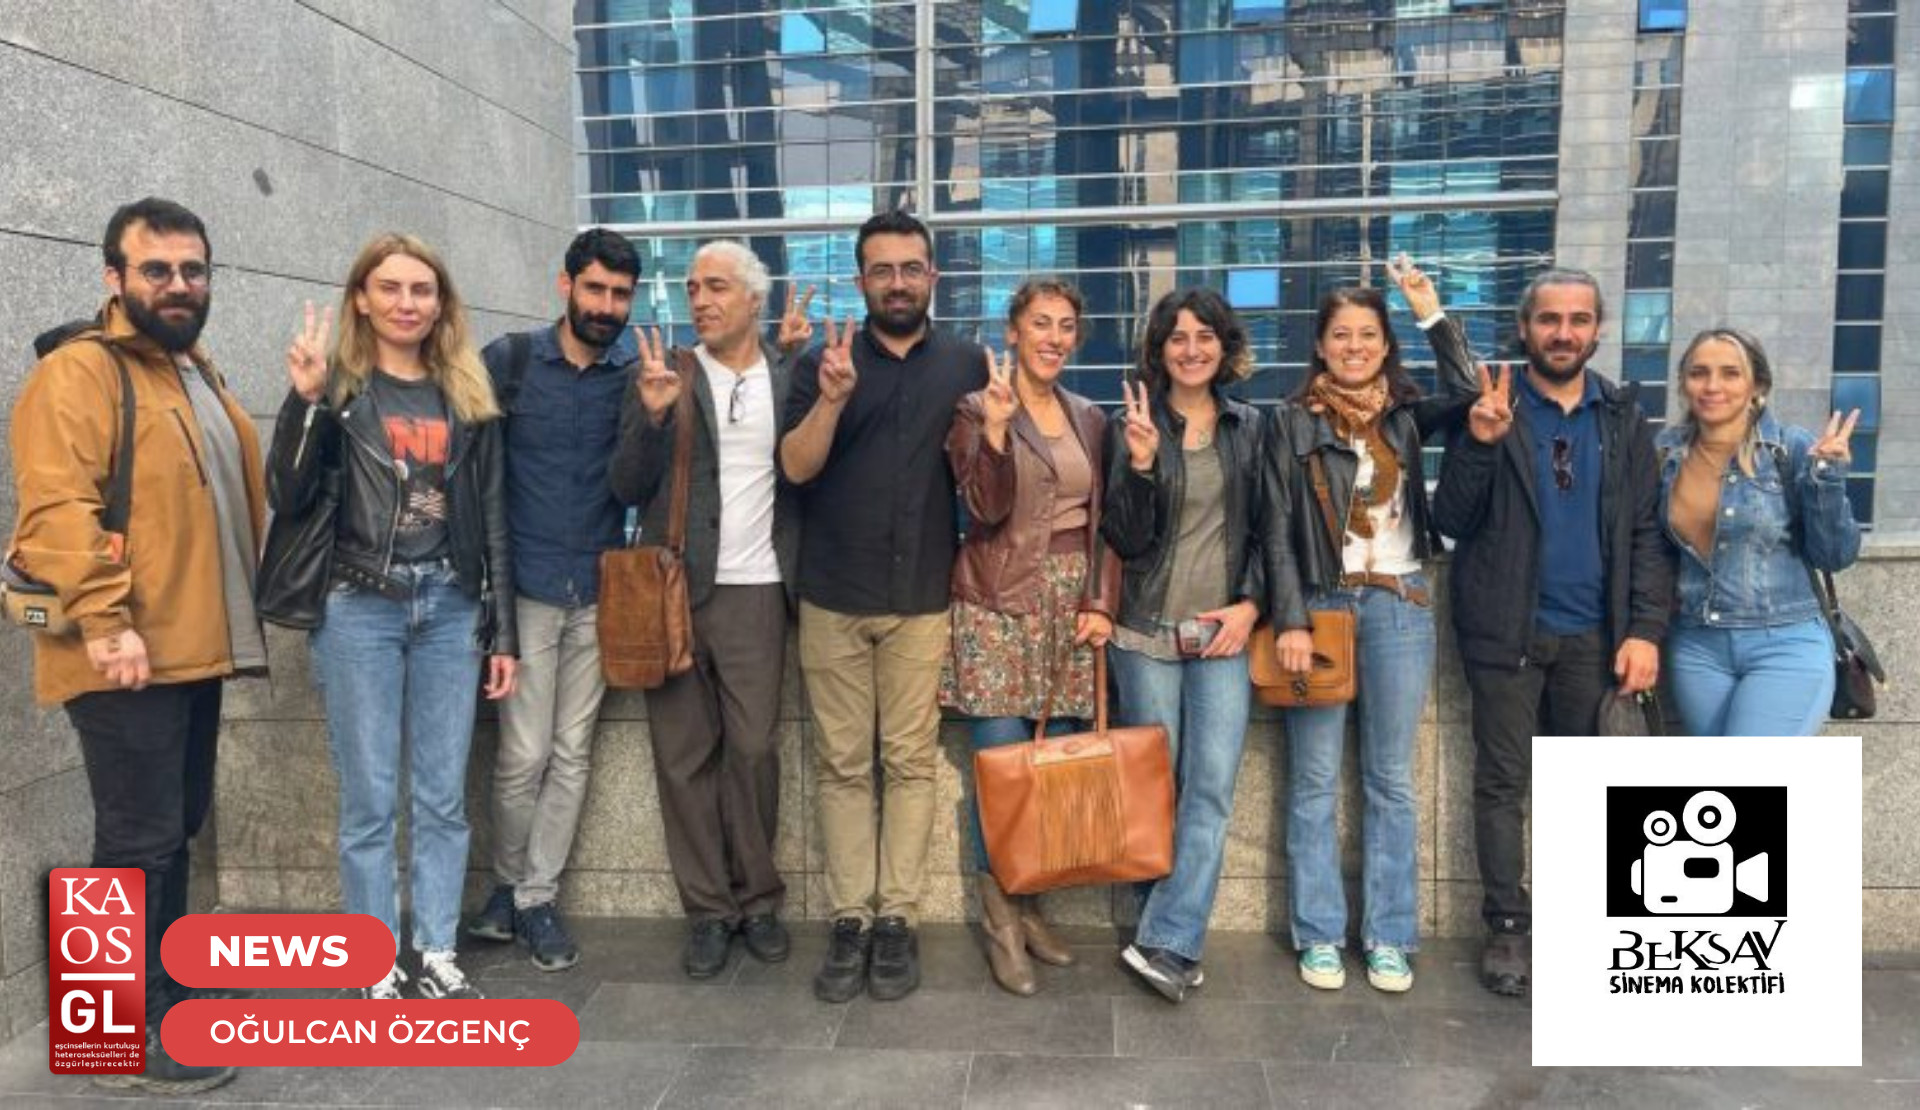 “Considering to postpone the case instead of rendering a decision of acquittal promptly, constitutes a breach of the right to a fair trial” | Kaos GL - News Portal for LGBTI+